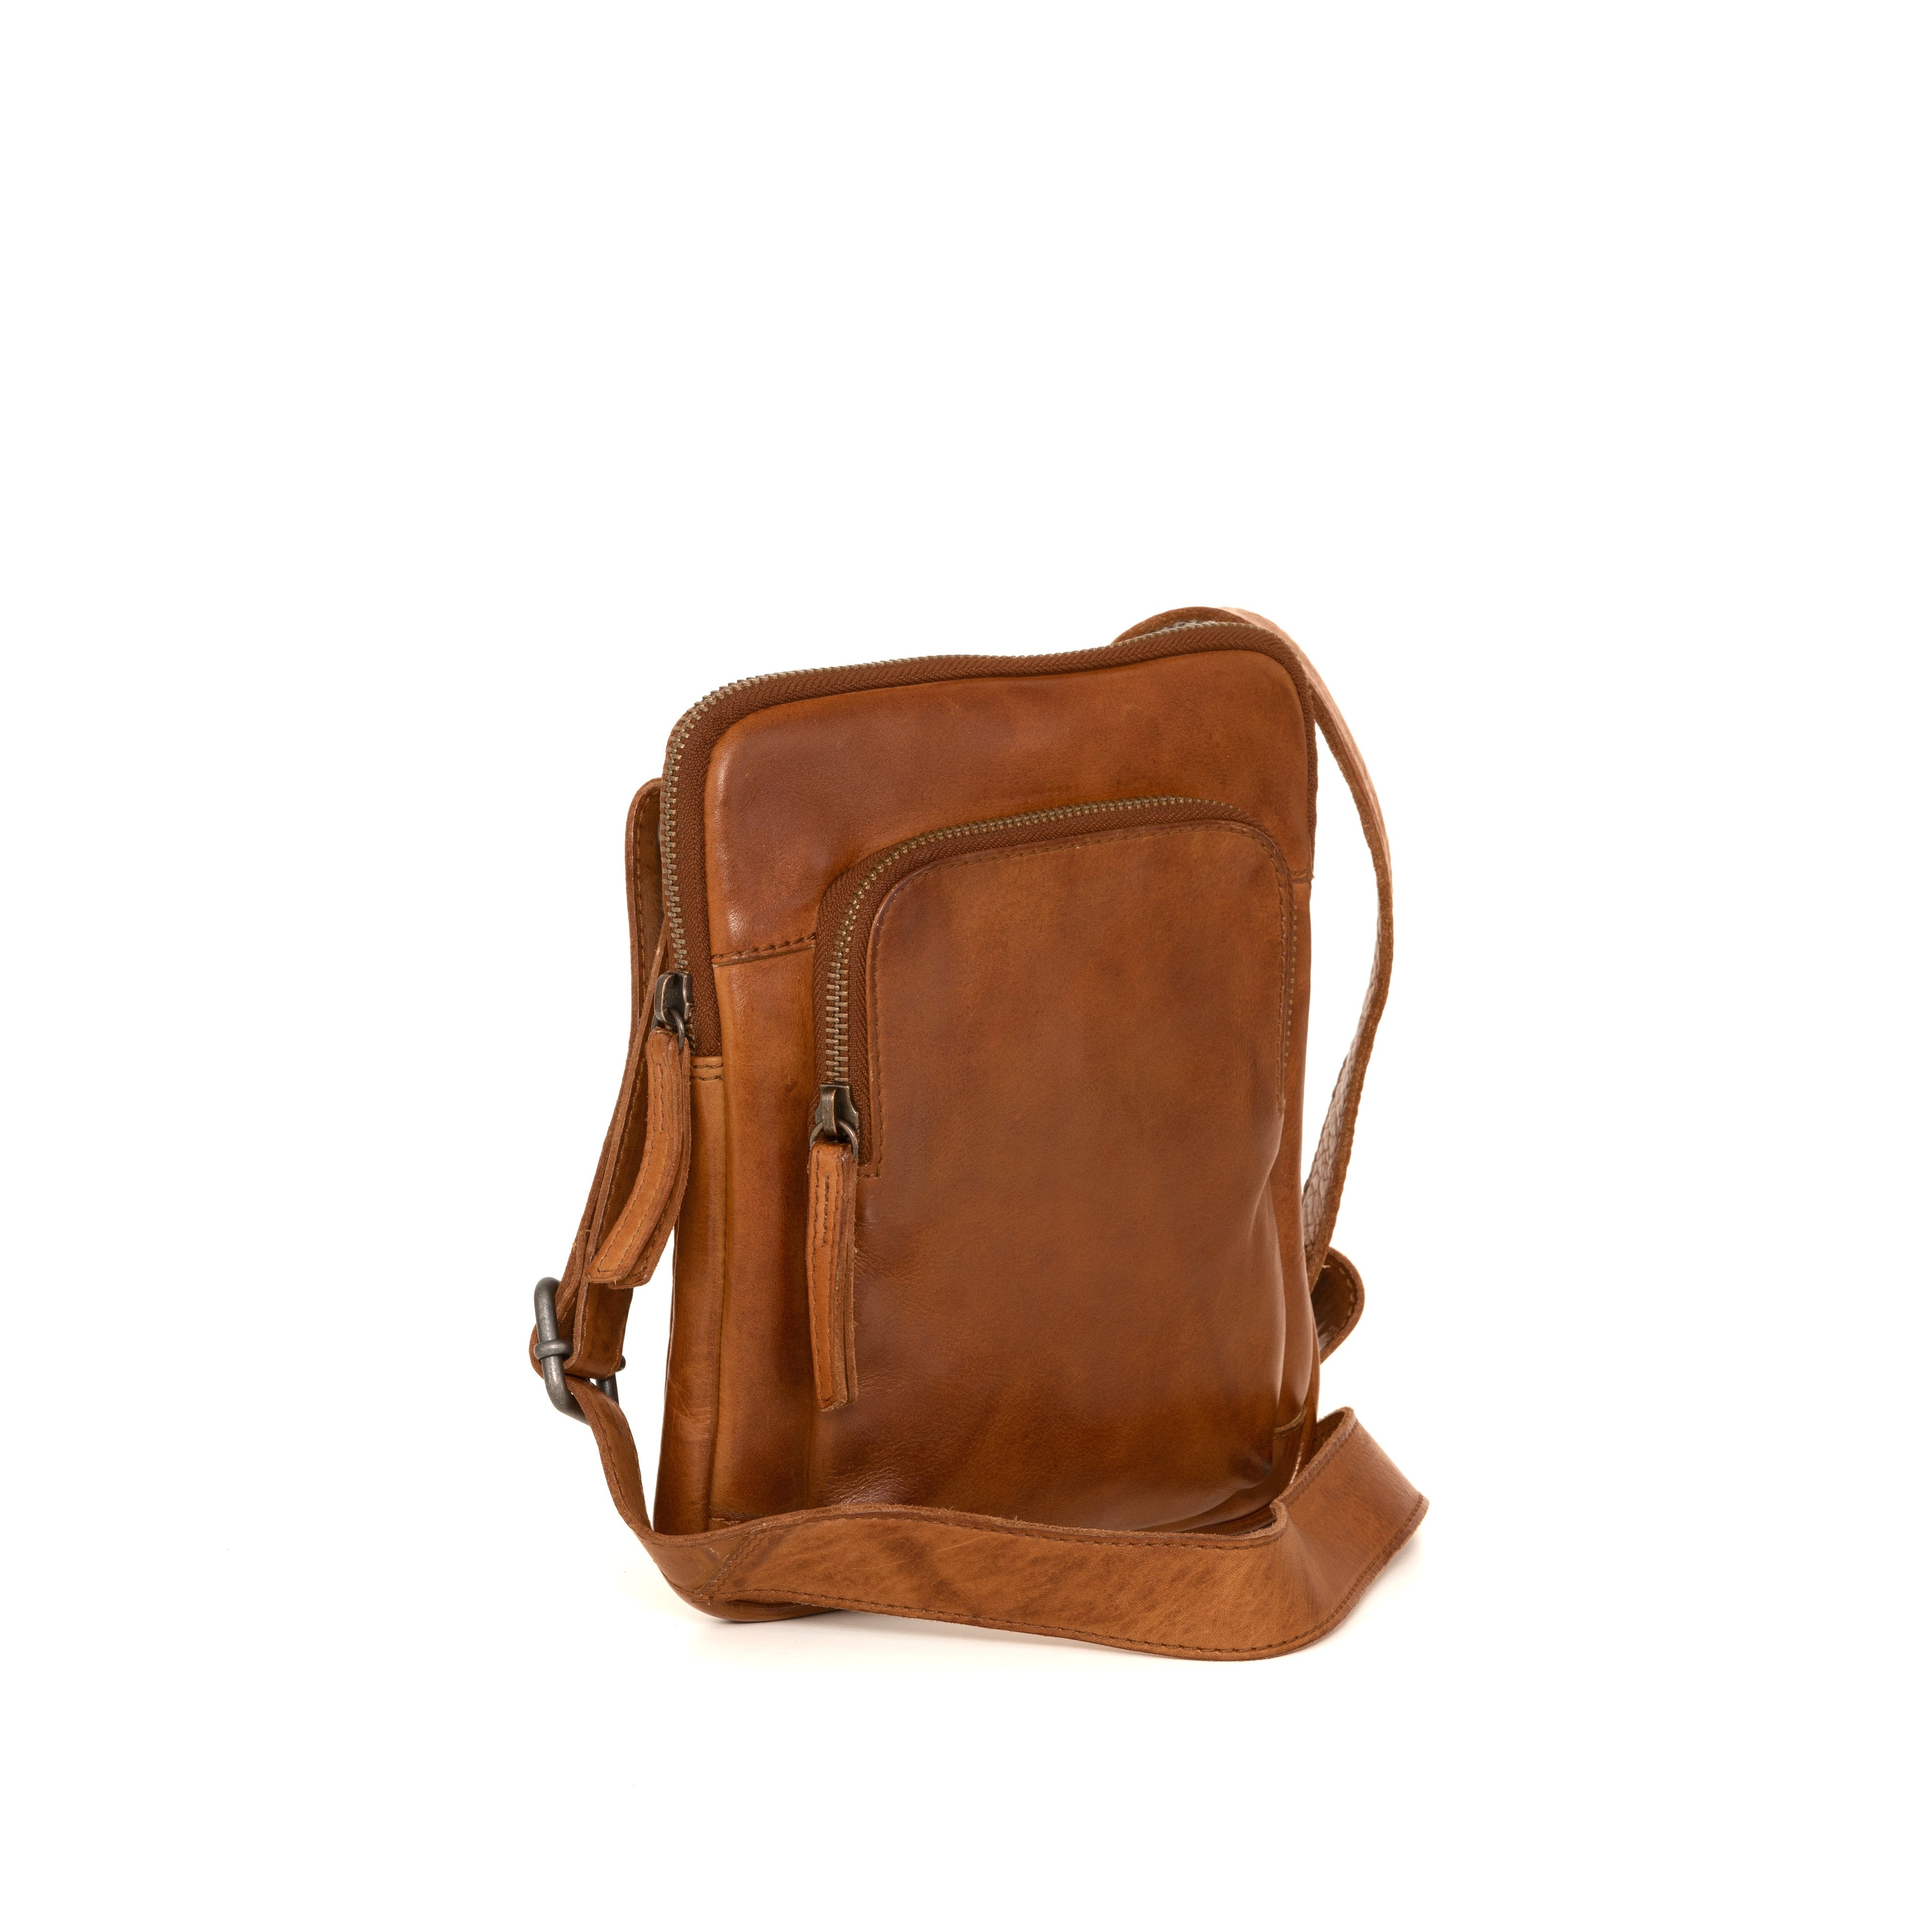 Gianni Conti Vintage Brown Leather Crossbody